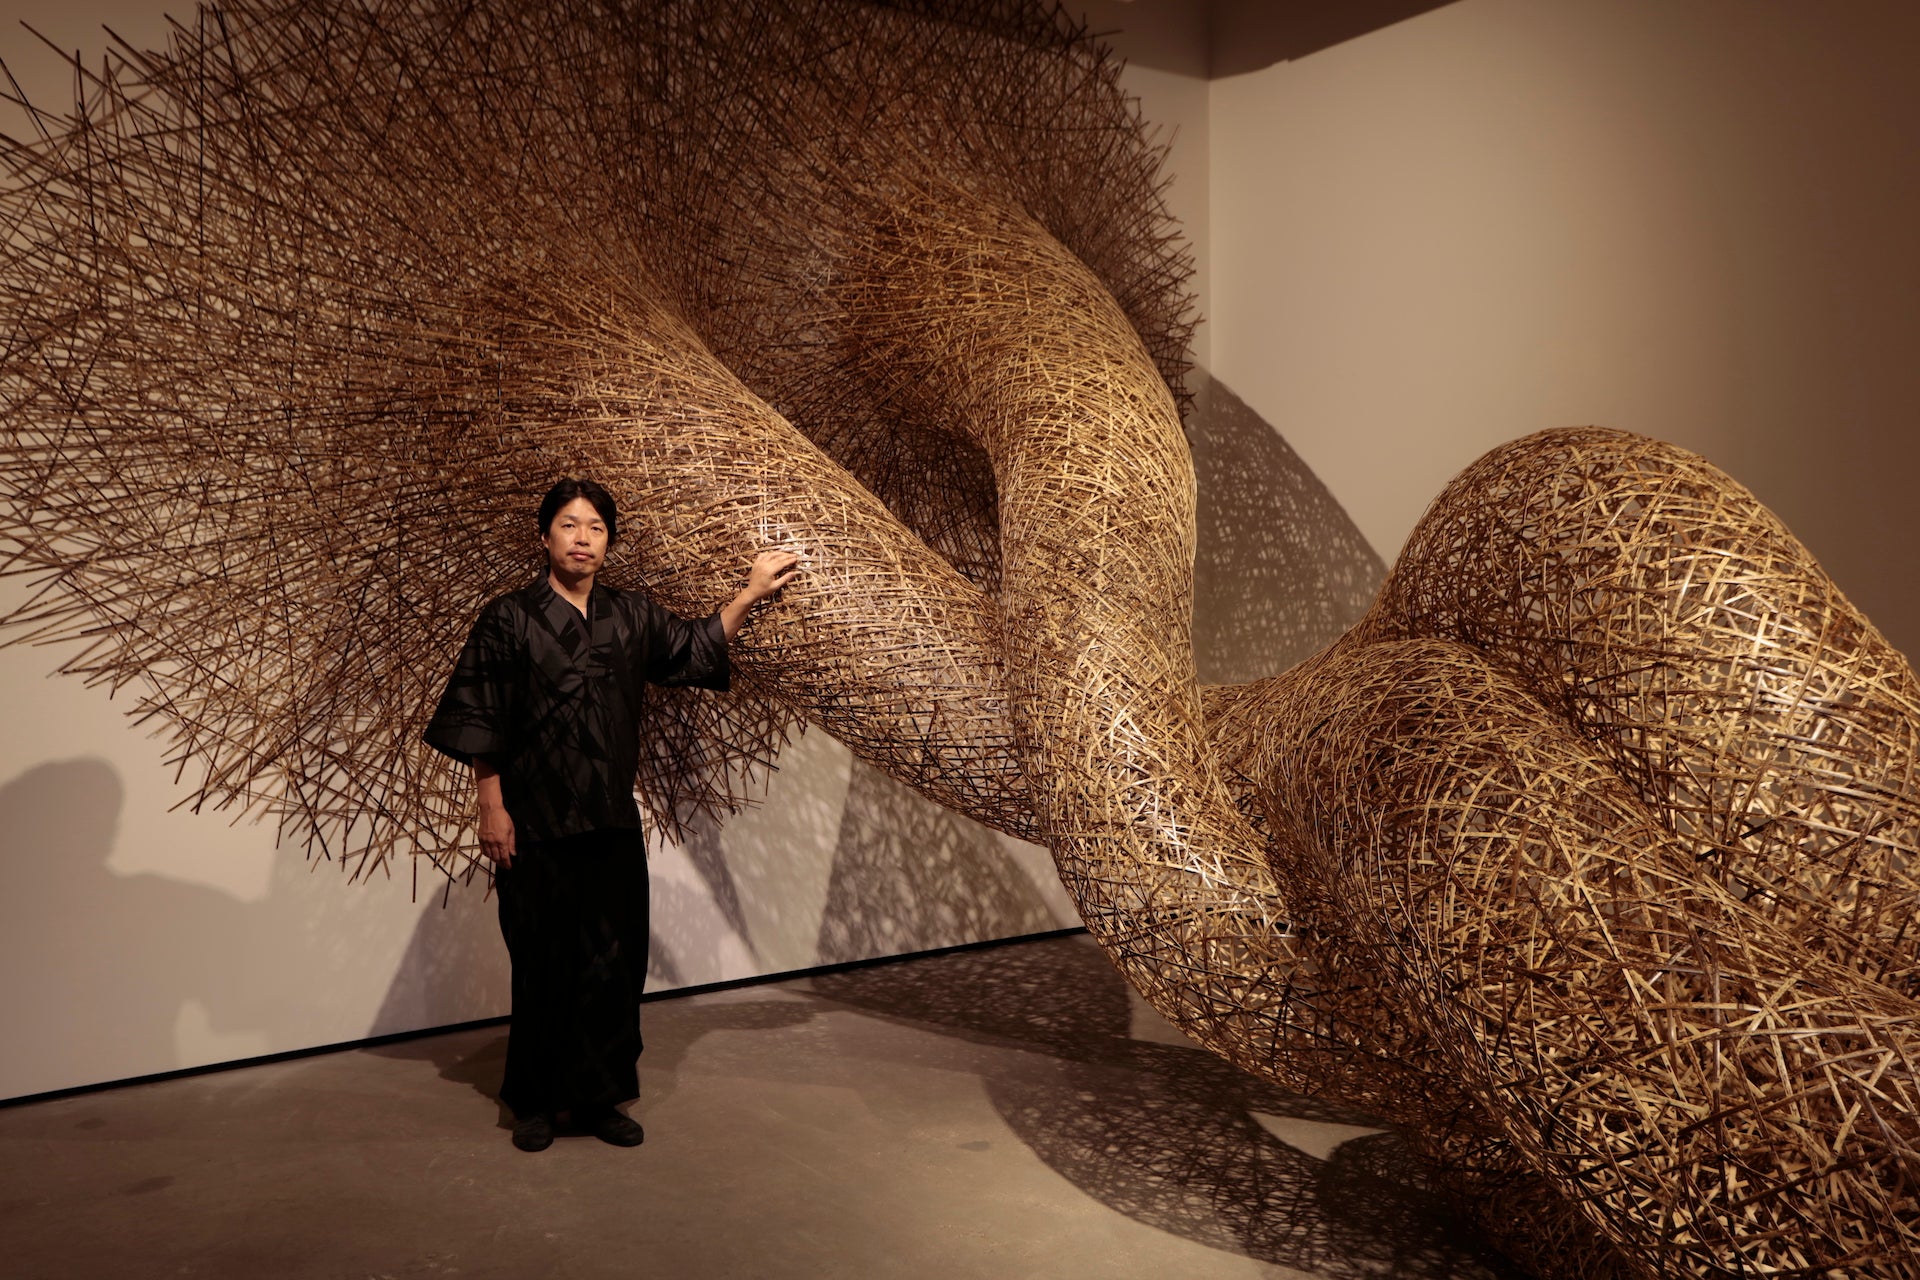 Bamboo artist Tanabe Chikuunsai IV with his Connection sculpture (2019), installed at TAI Modern in Santa Fe. Photo © Gary Mankus.